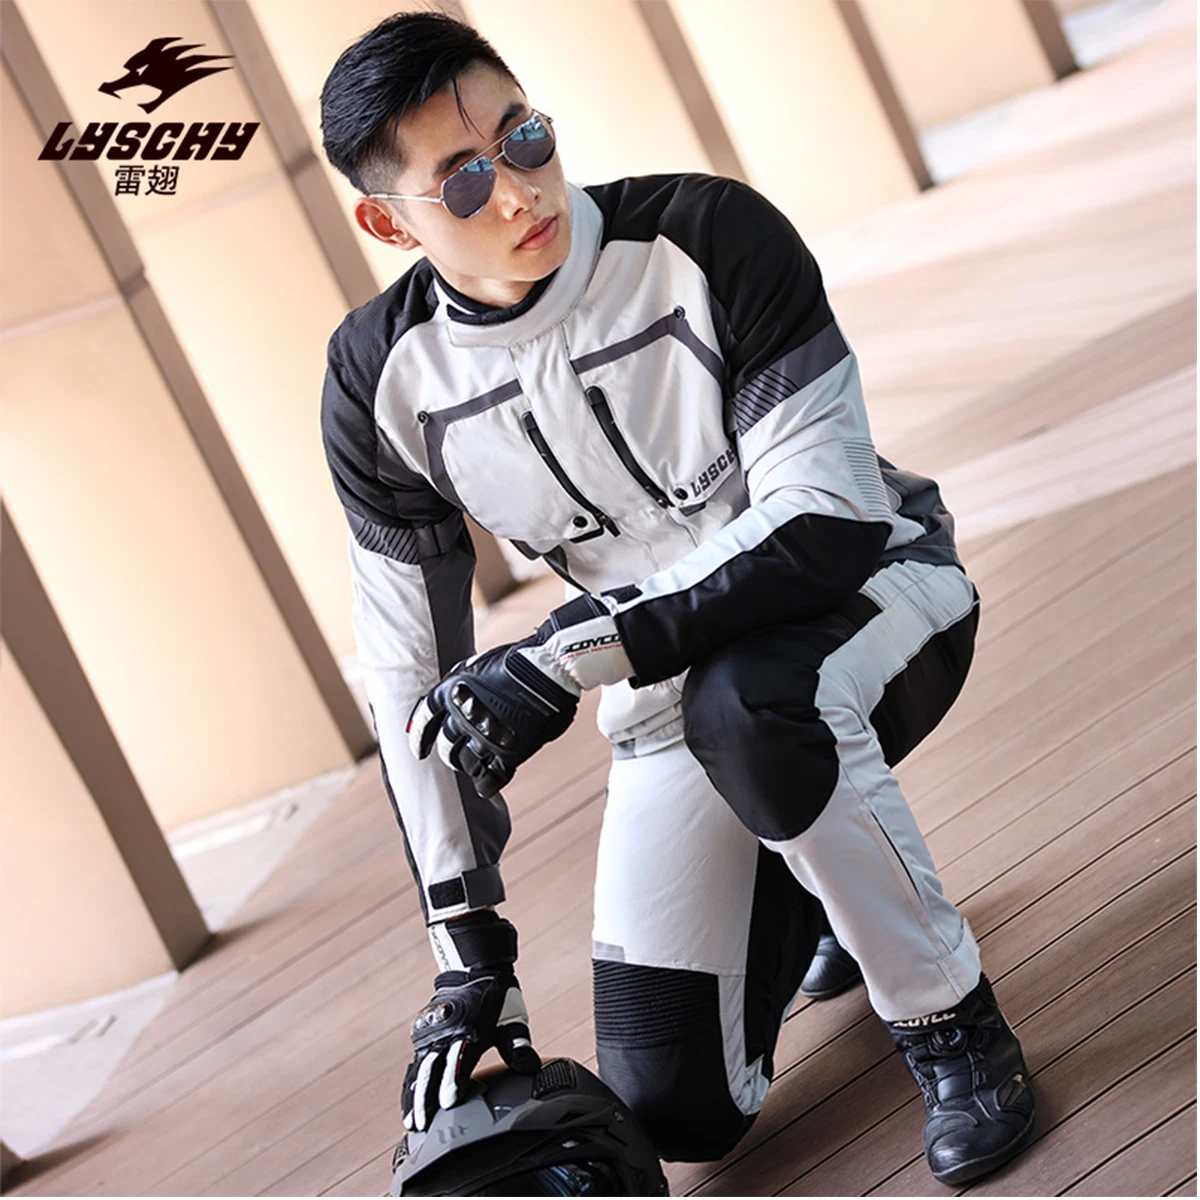 

LYSCHY Motorcycle Jacket Winter Racing Suit With Warm Liner CE Protectors Rainproof Moto Touring Adventurefor All Seasons